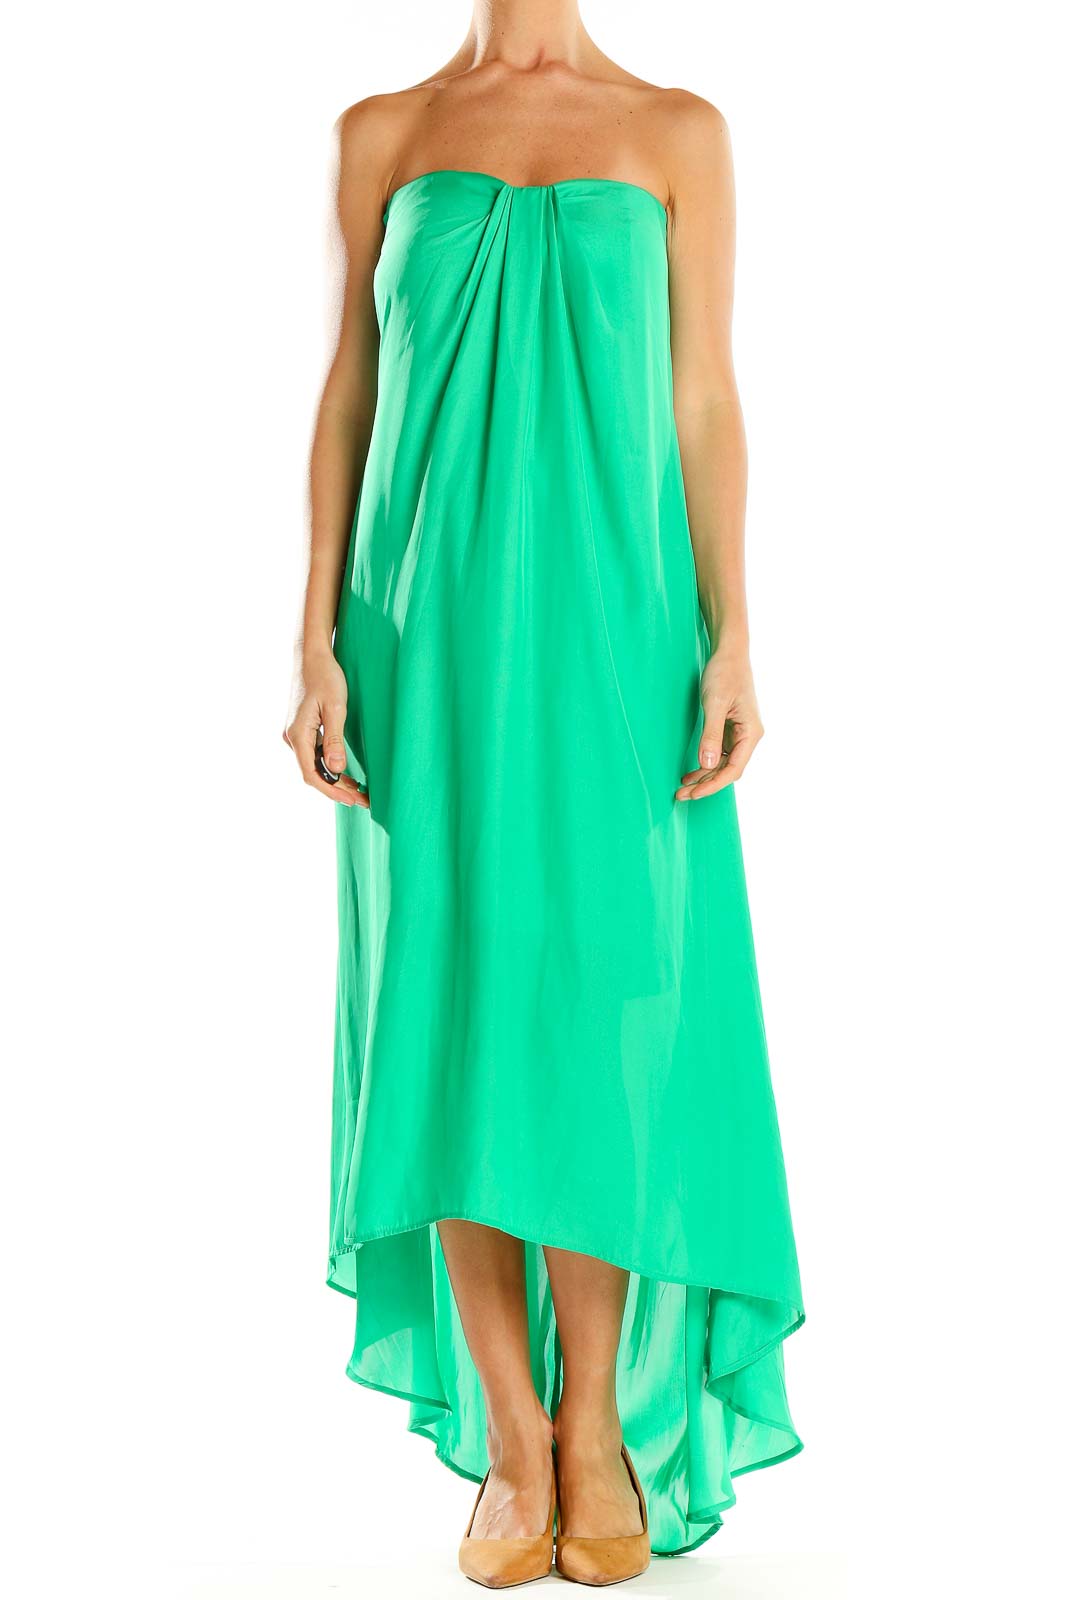 Green Strapless High Low Dress Front